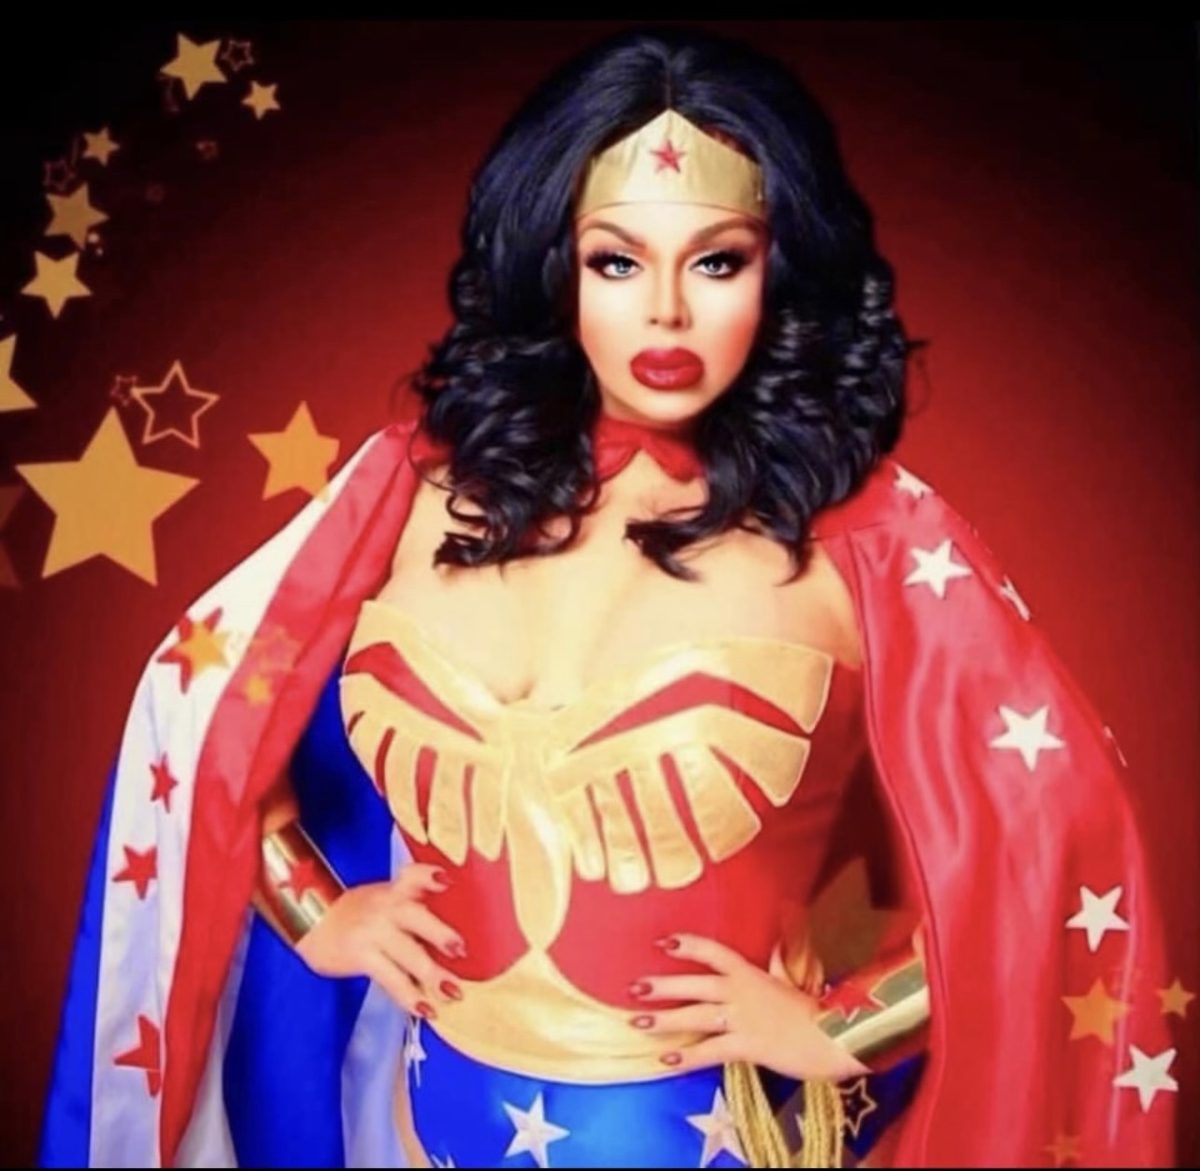 Wearing her custom Wonder Woman drag costume, drag queen Kelly Kline poses confidently. Kline occasionally wears her Wonder Woman costume to protest for LGBTQA+ rights.